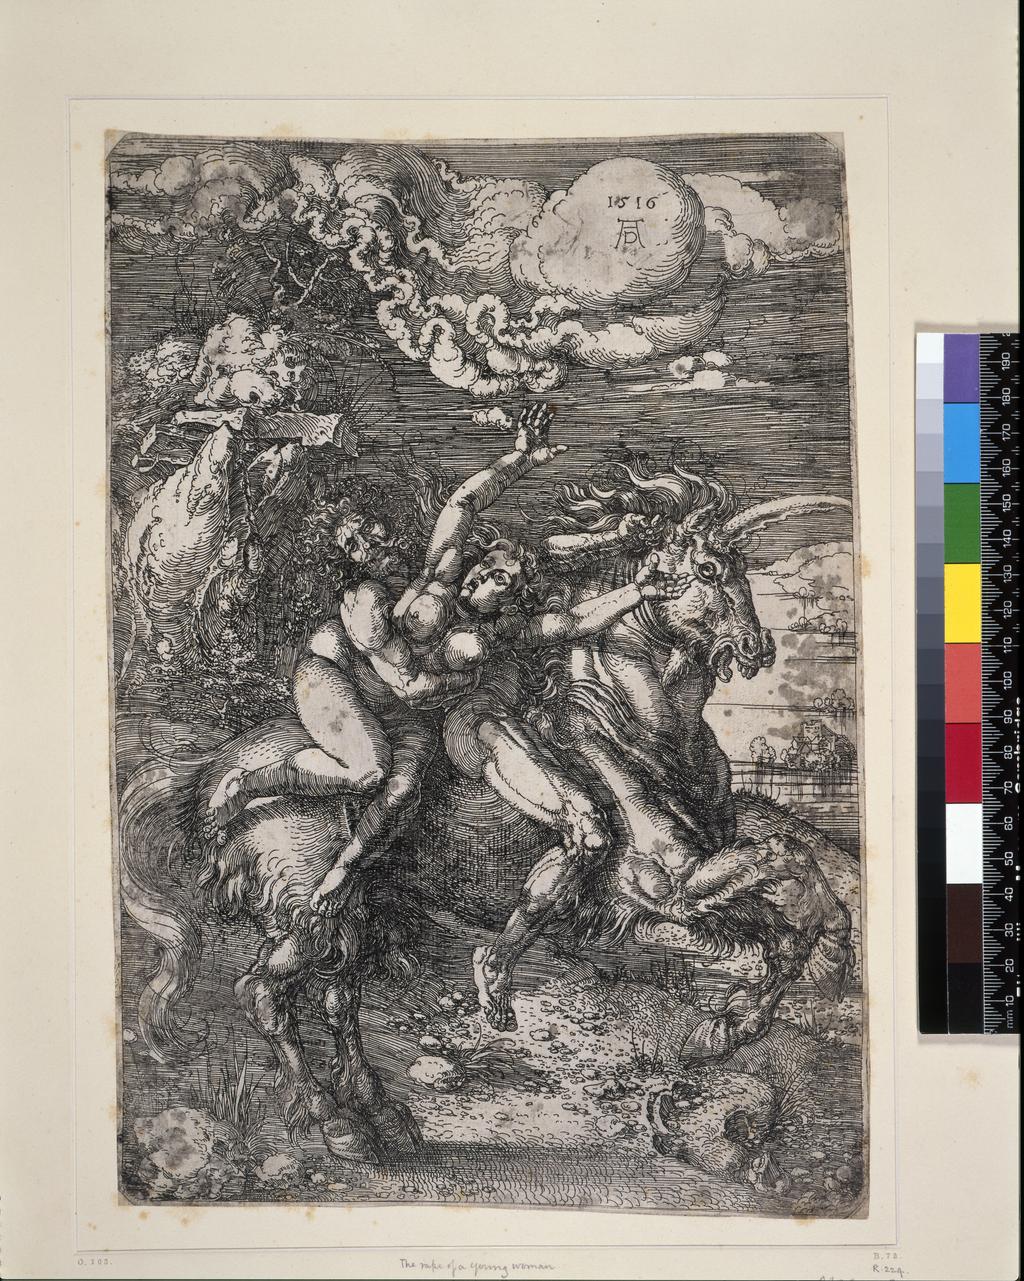 The Abduction of a young woman on a unicorn